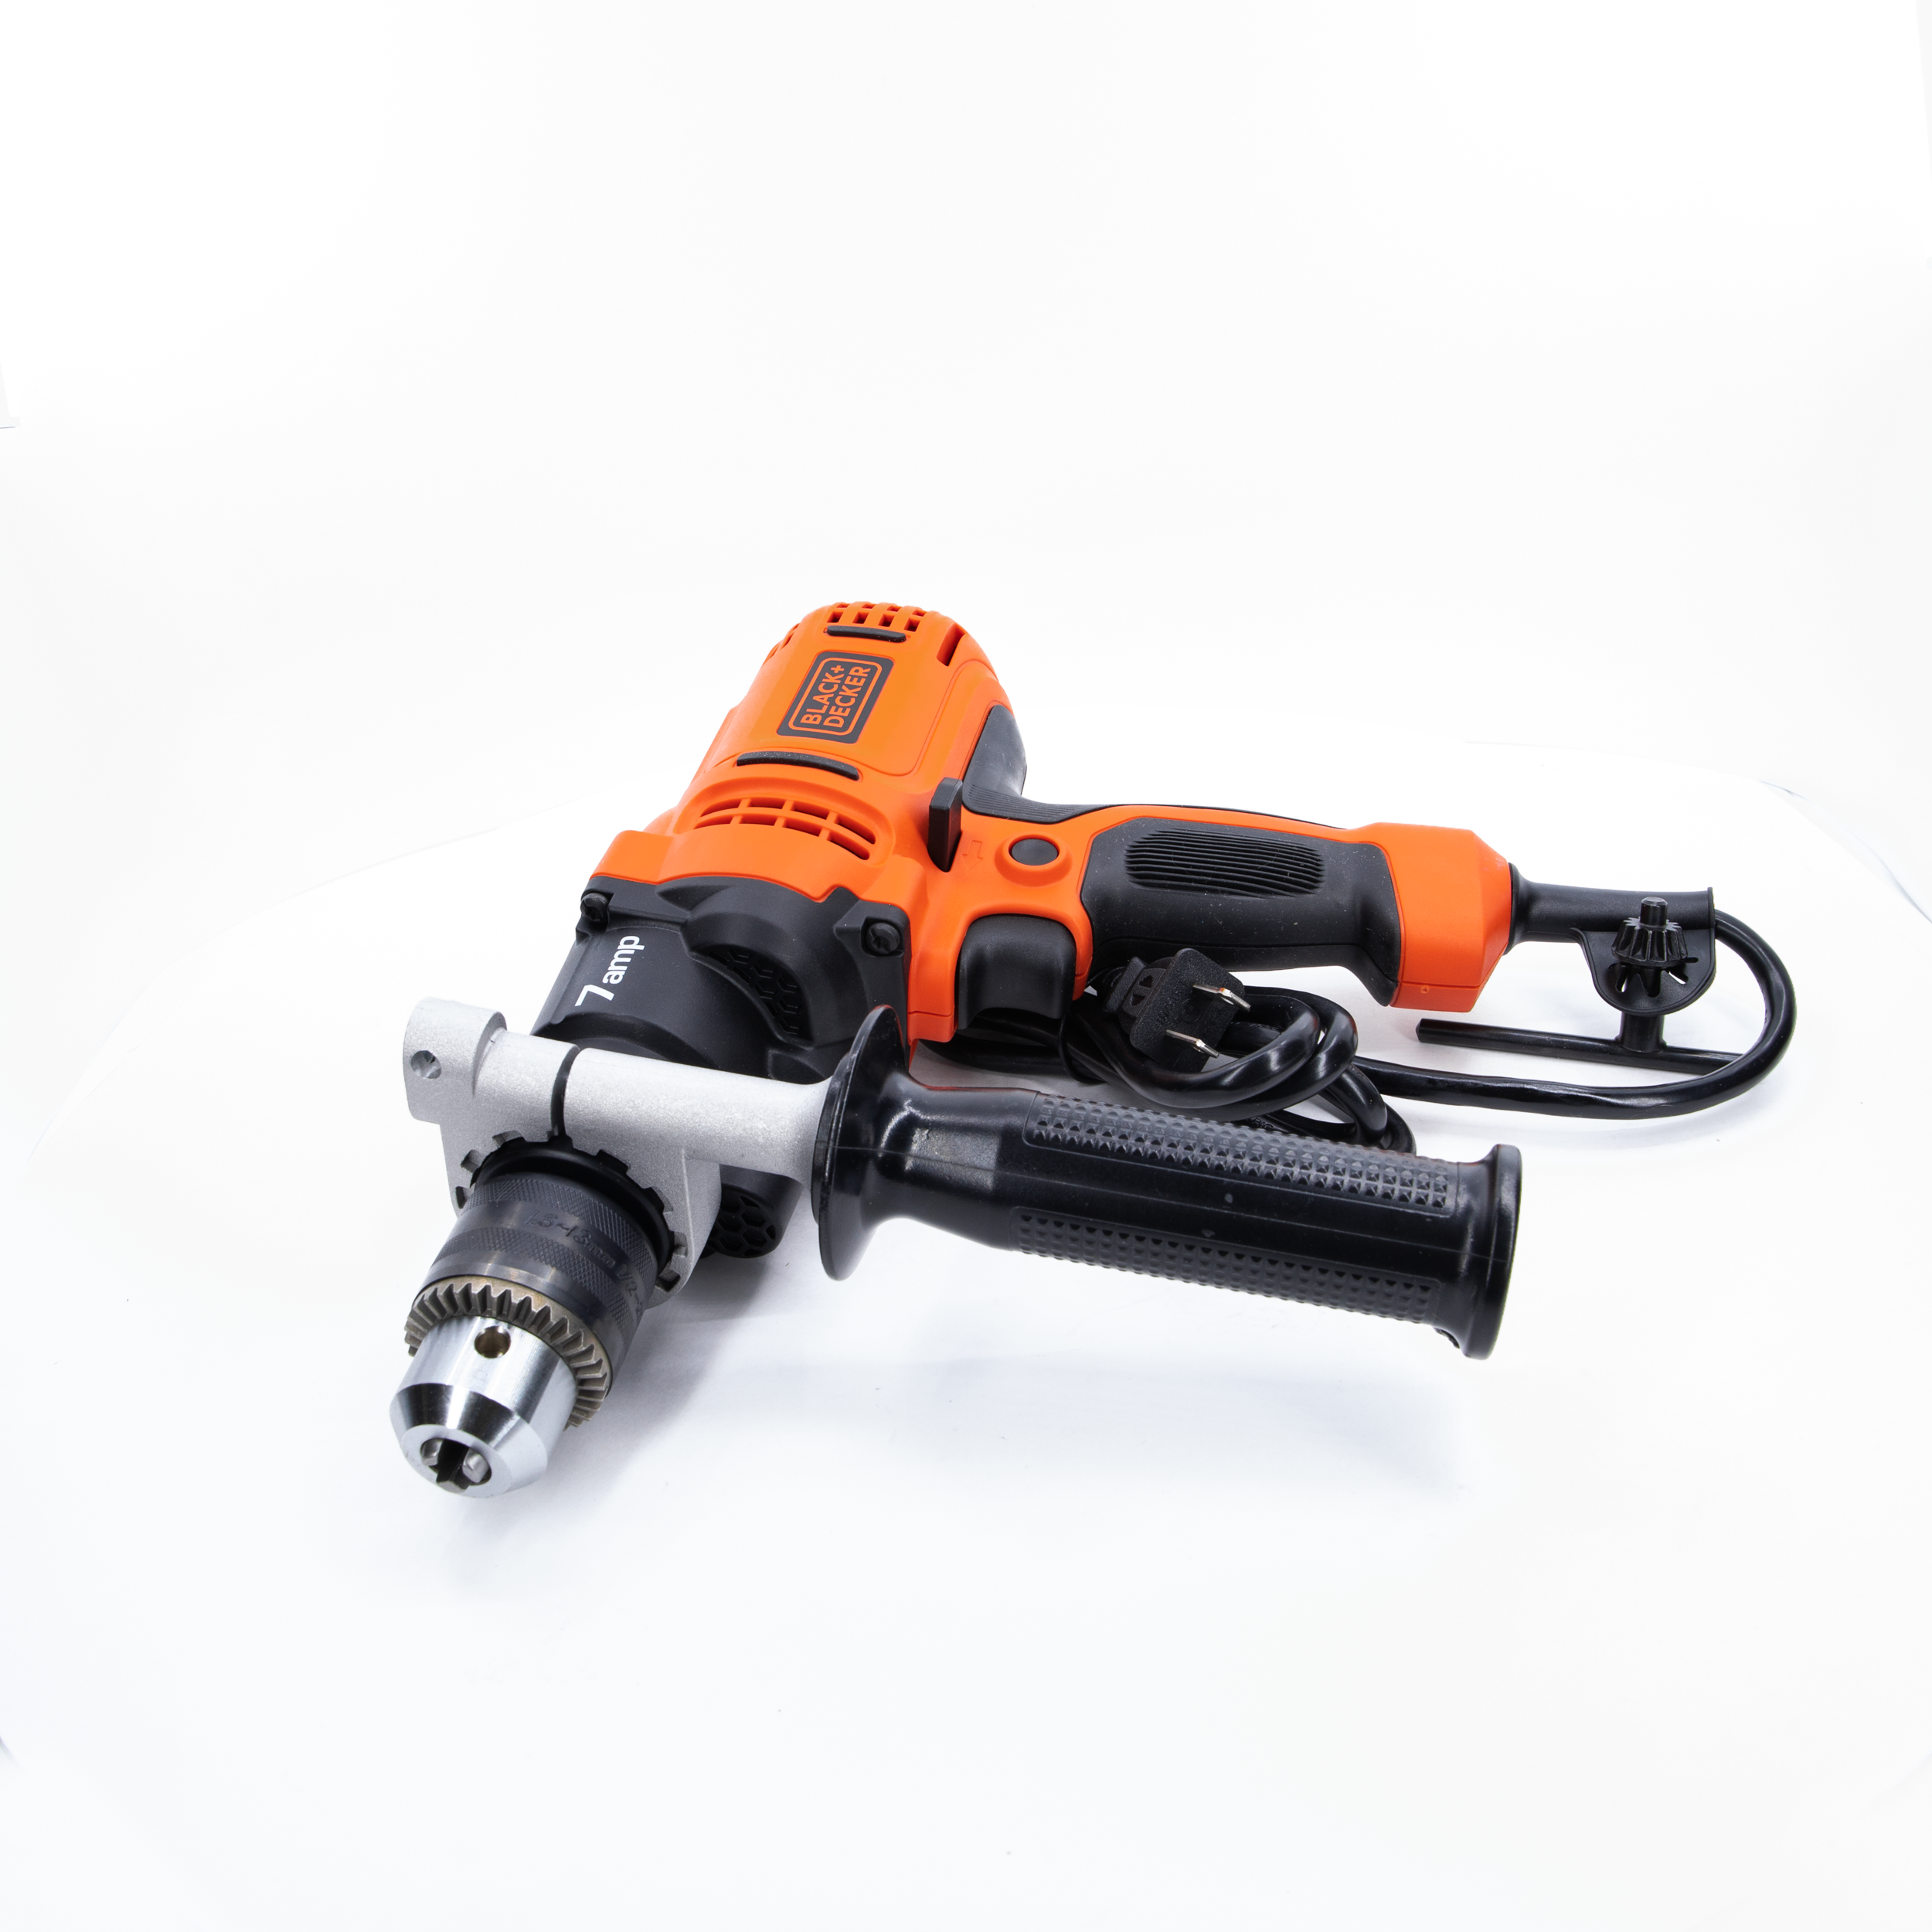 BLACK+DECKER 7.0 Amp 1/2 in. Electric Drill/Driver Kit (DR560)